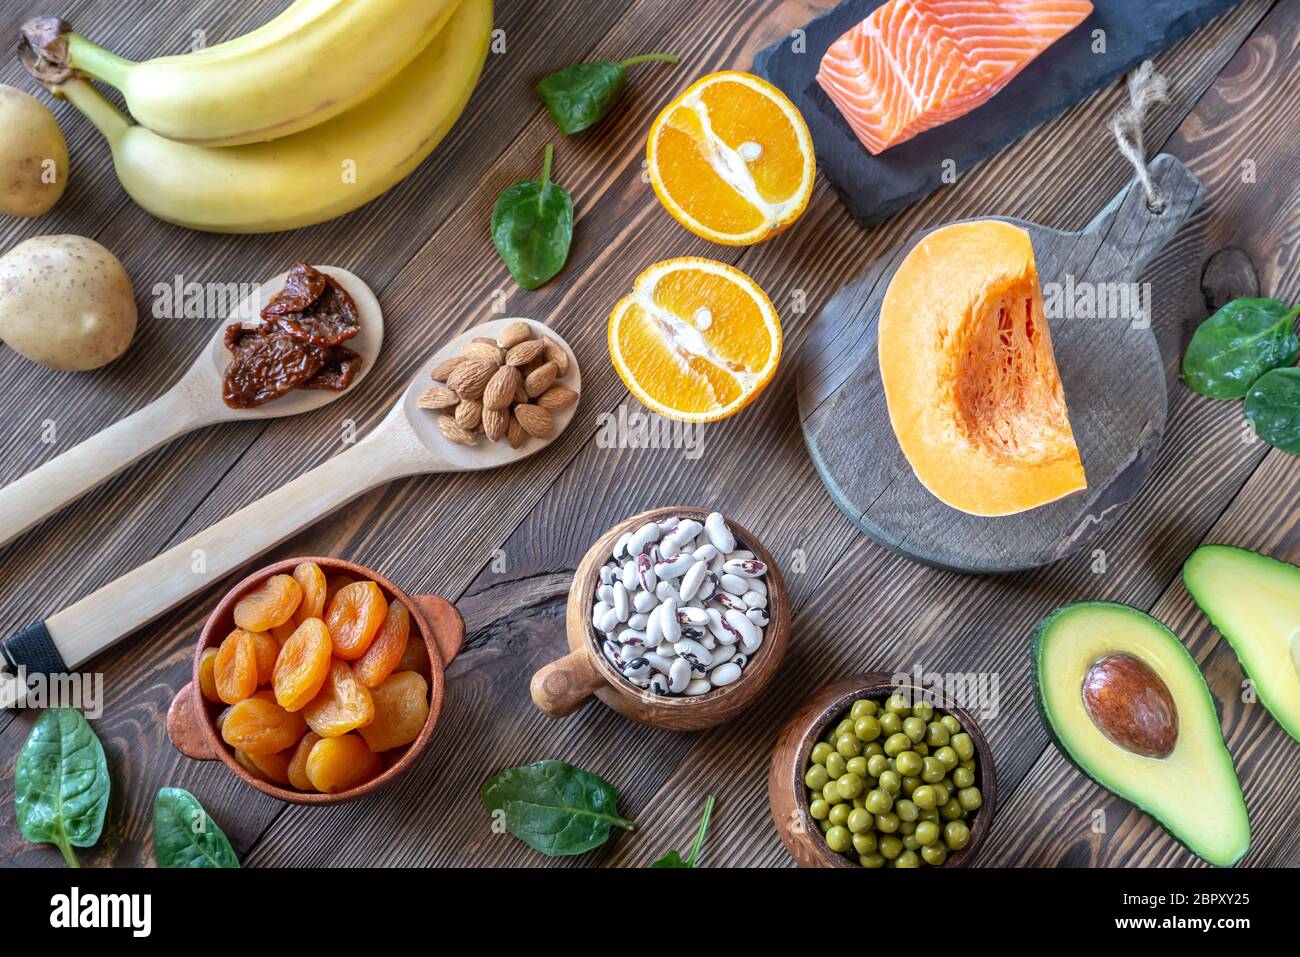 Healthy Foods That Are High in Potassium Stock Photo